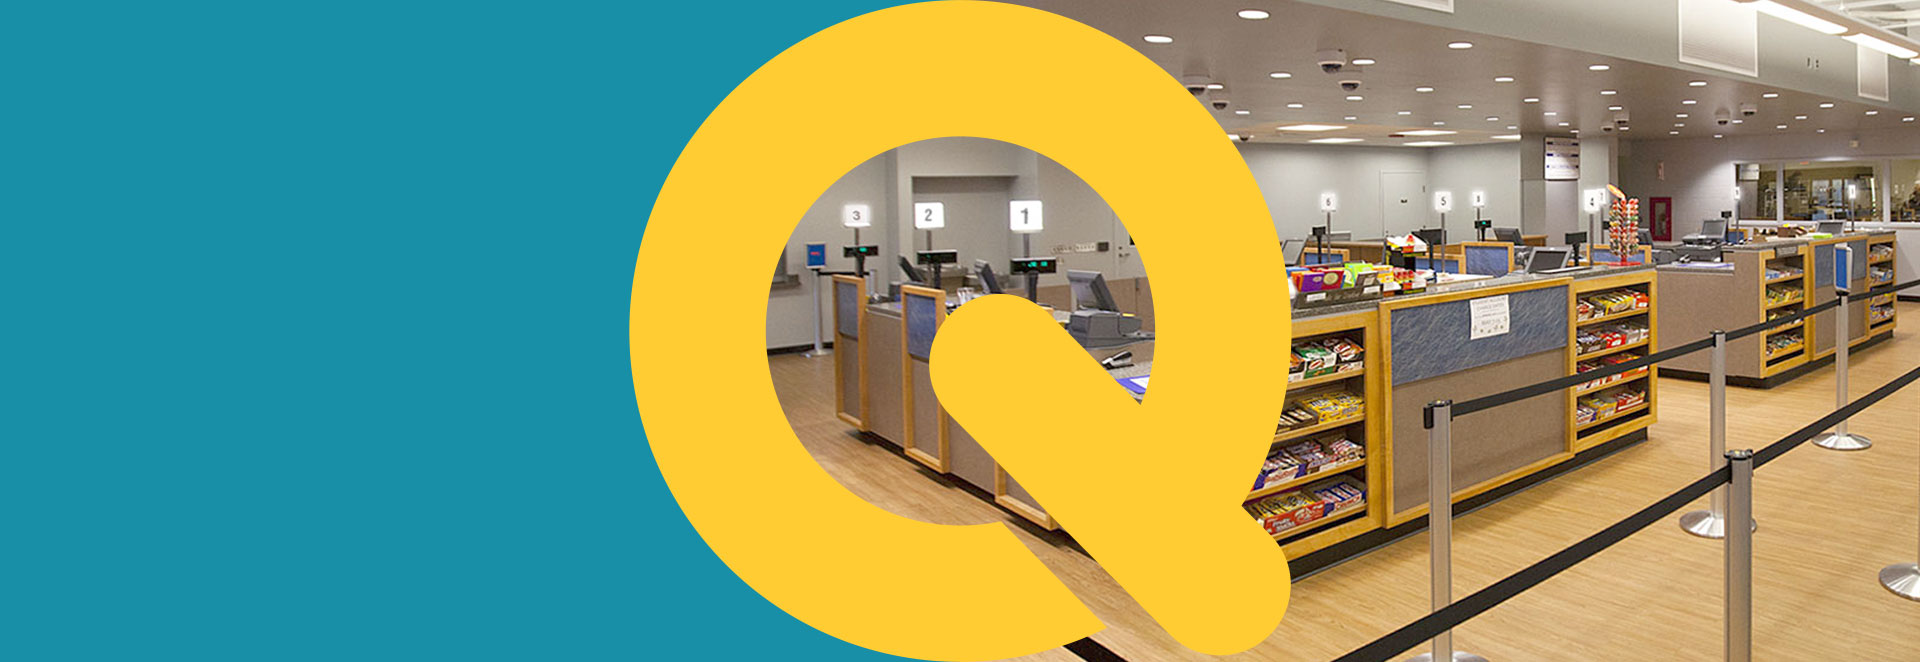 Artwork separated by a Q logo, with the left being a blue background and the right having a single line queue with register lights at every register.